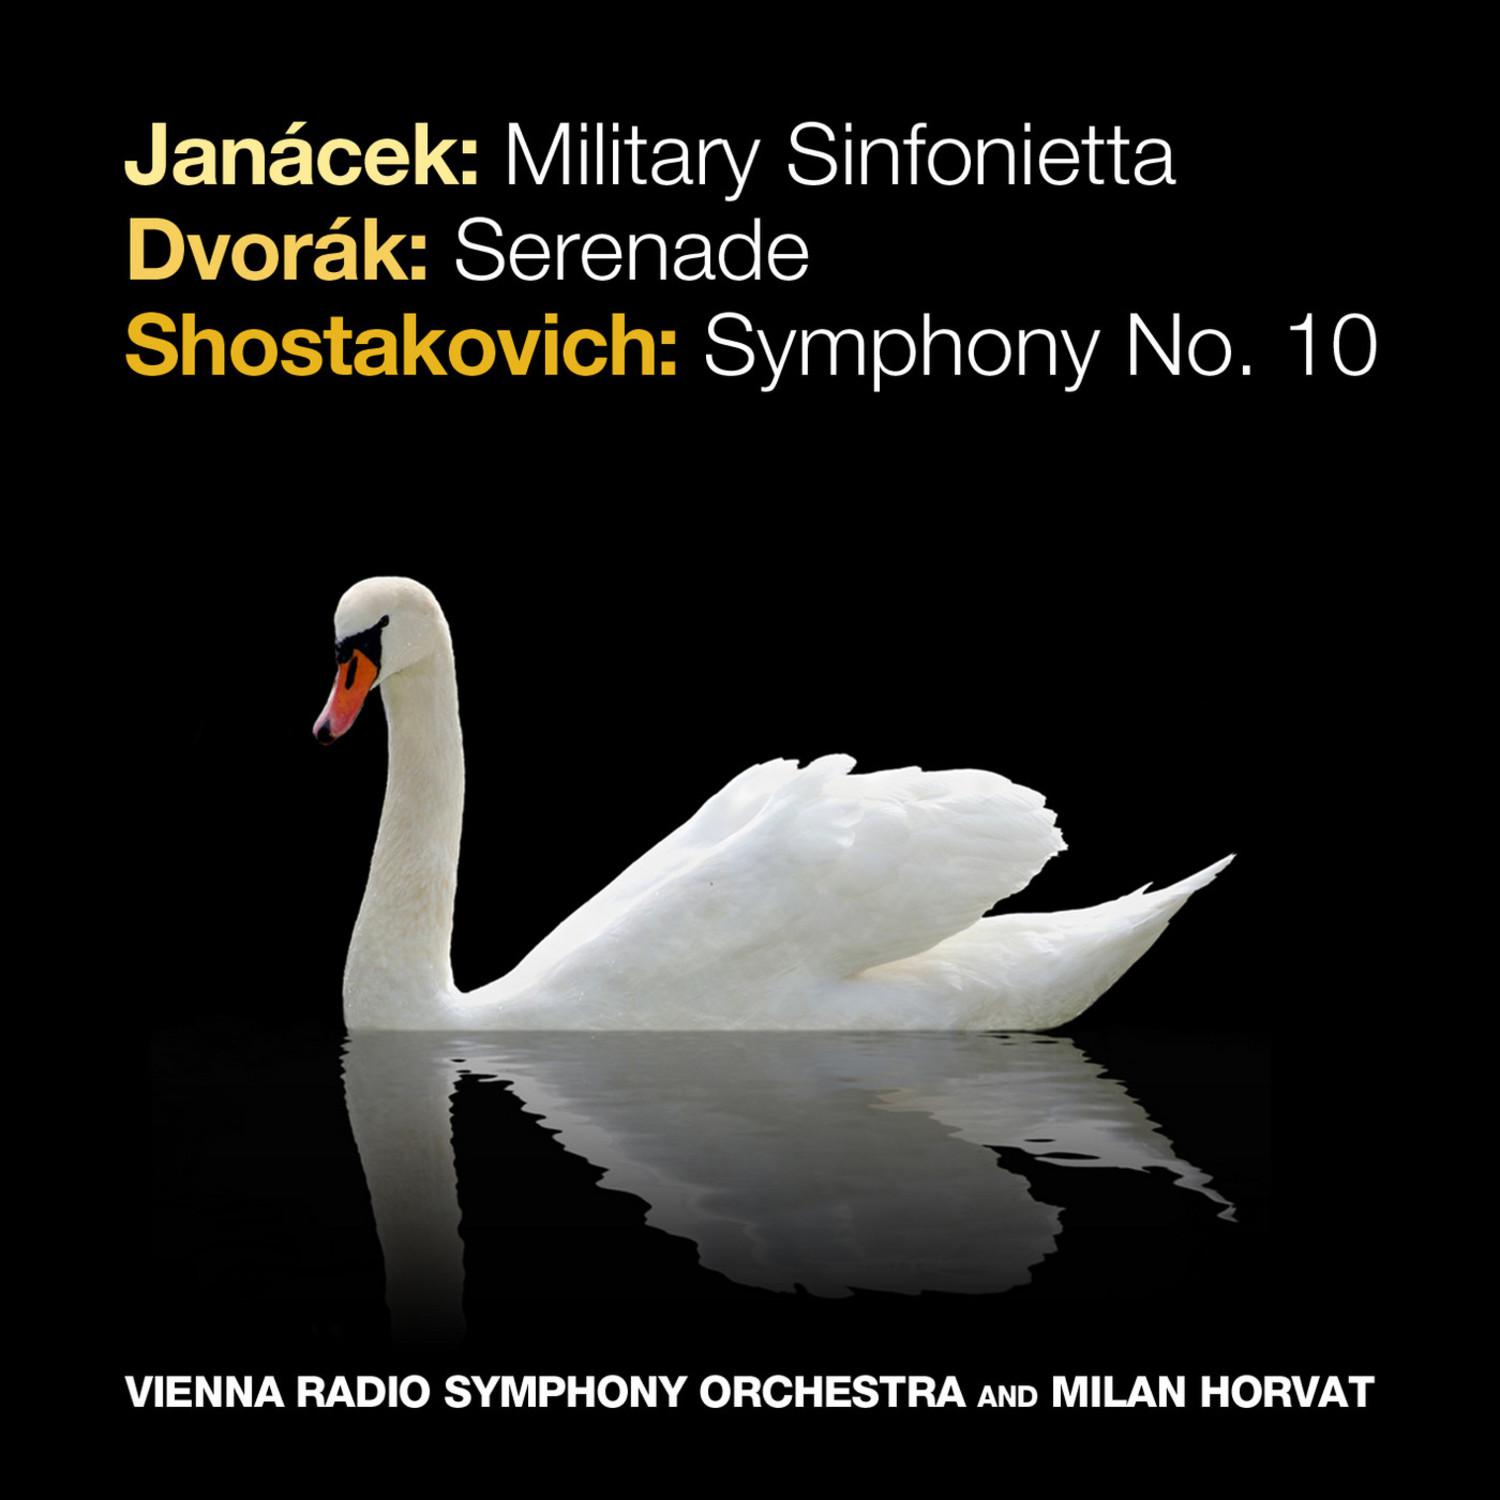 Military Sinfonietta, Op. 60: IV. The Street Leading to the Castle: Allegretto